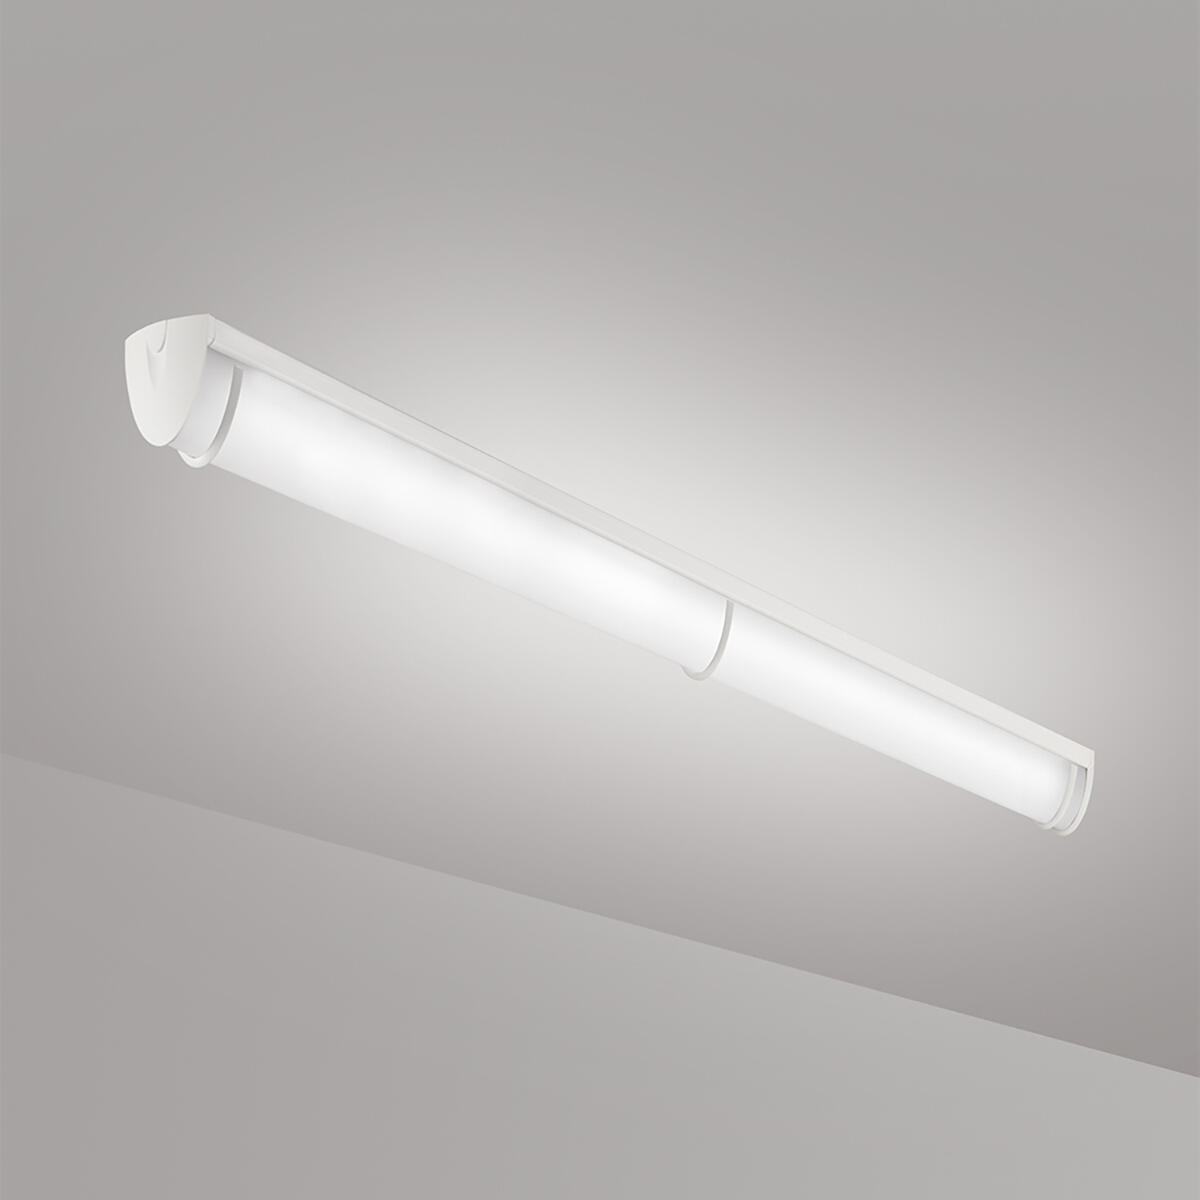 A luminous ceiling or surface-mounted luminaire with a curved linear diffuser body and trim accents